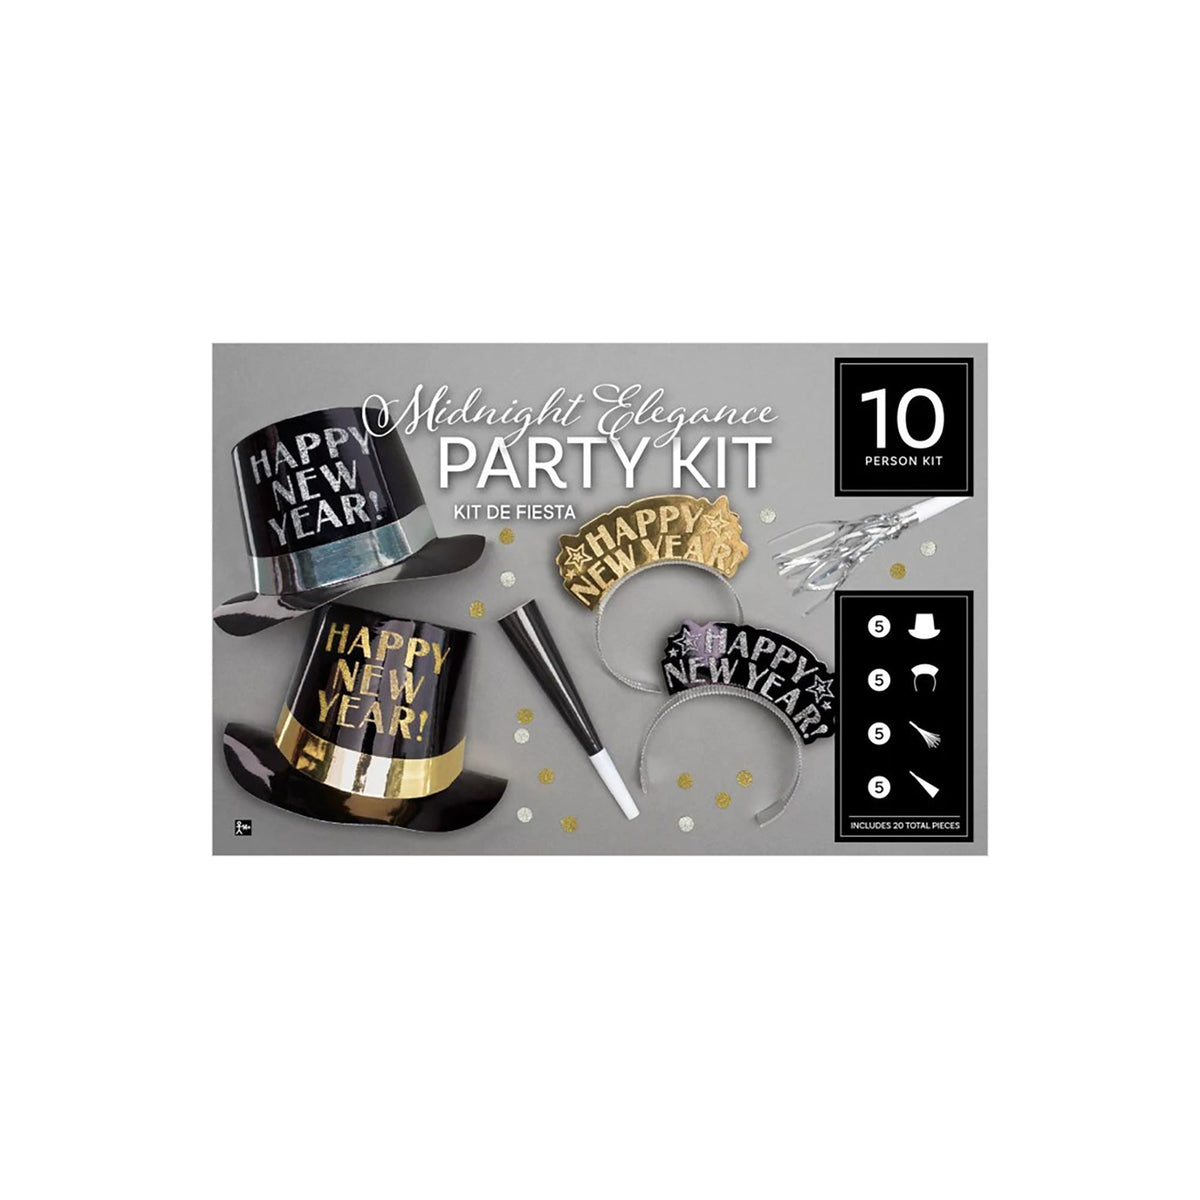 AMSCAN CA New Year Midnight Elegance Party Kit for 10 People 013051867812